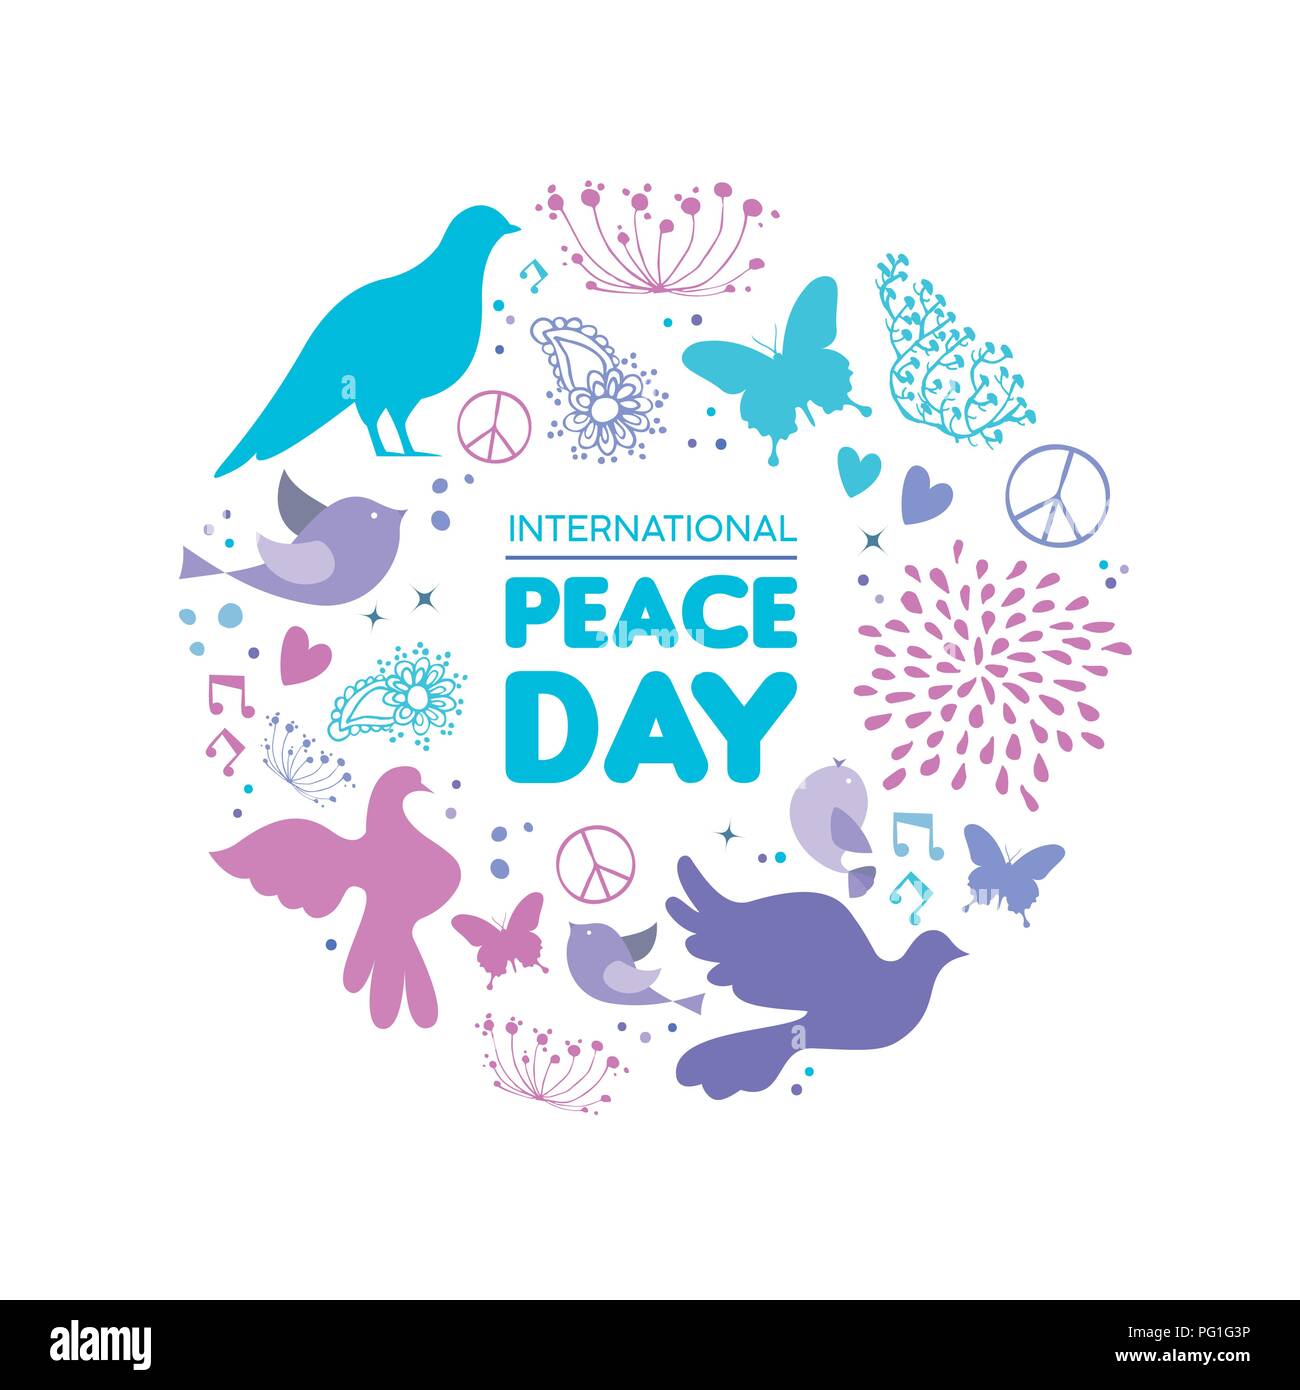 International Peace Day card illustration, dove bird hand drawn doodle decoration with nature elements for special celebration. EPS10 vector. Stock Vector